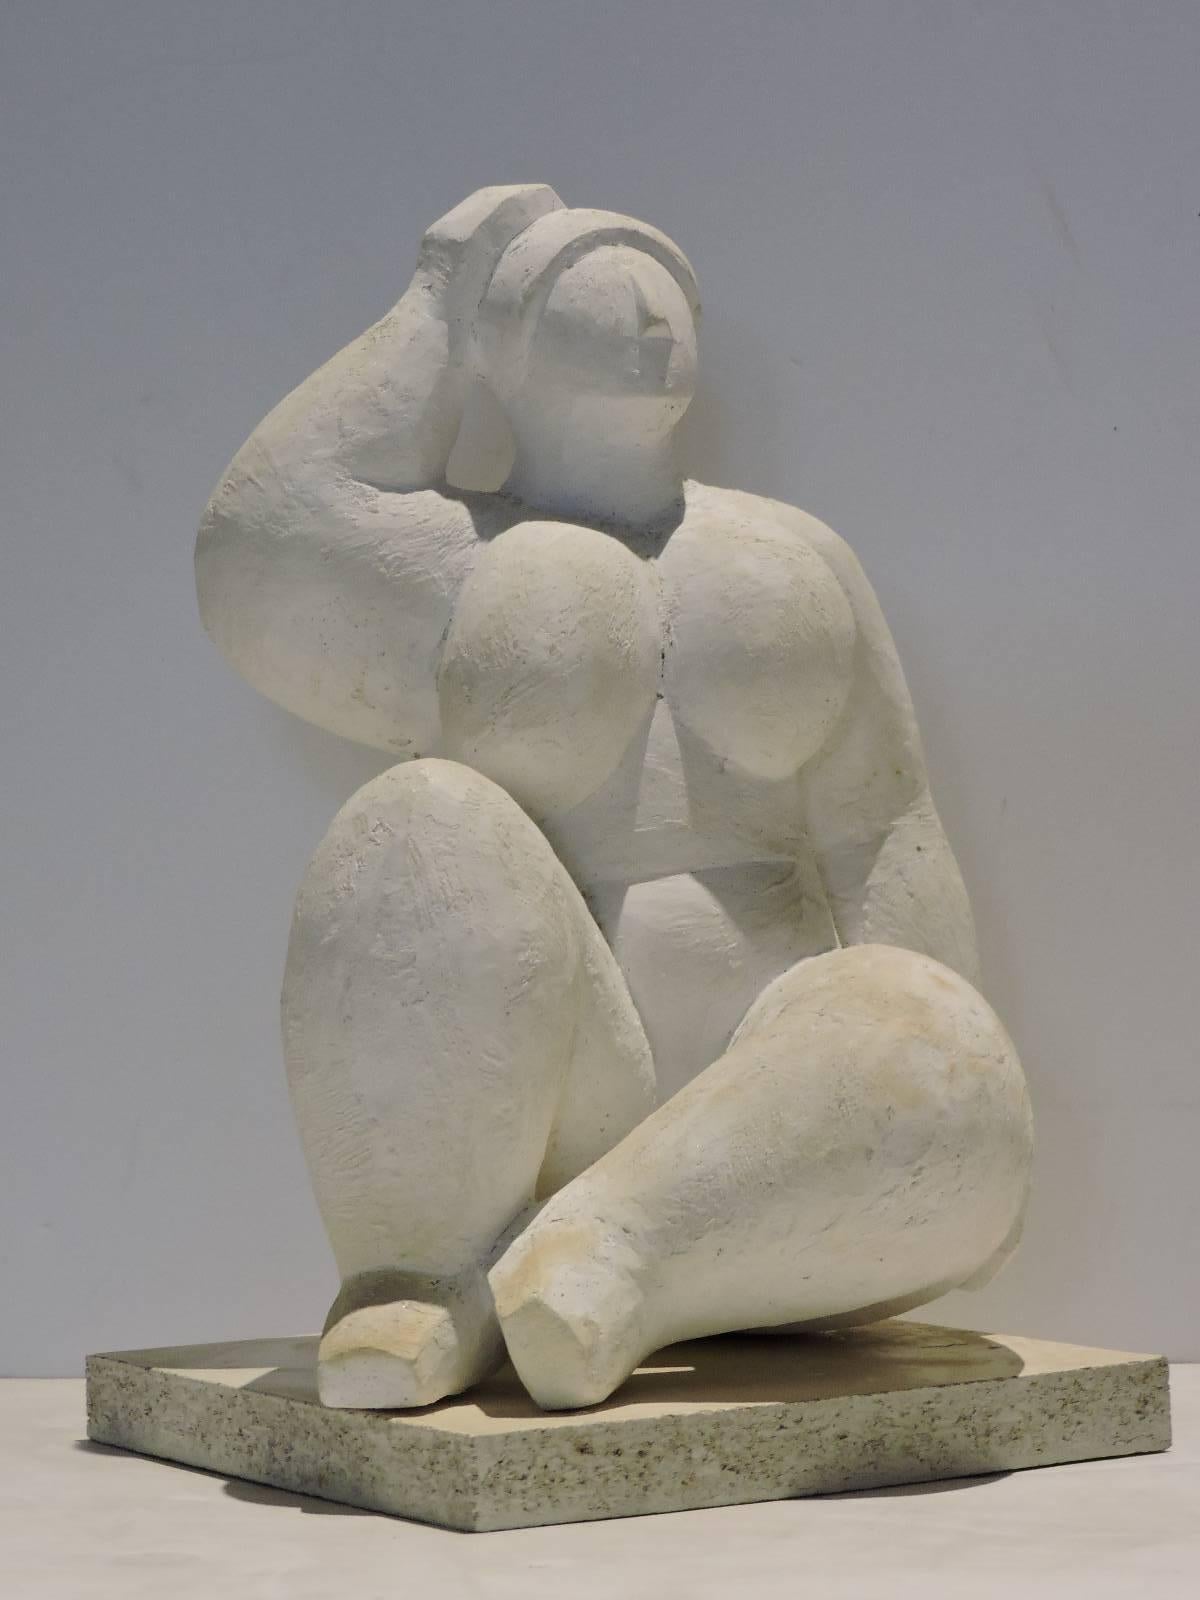 In the style of Fernando Botero - a carved solid white plaster artist sculpture of a nude woman with an exaggerated robust anatomical form, circa 1960.